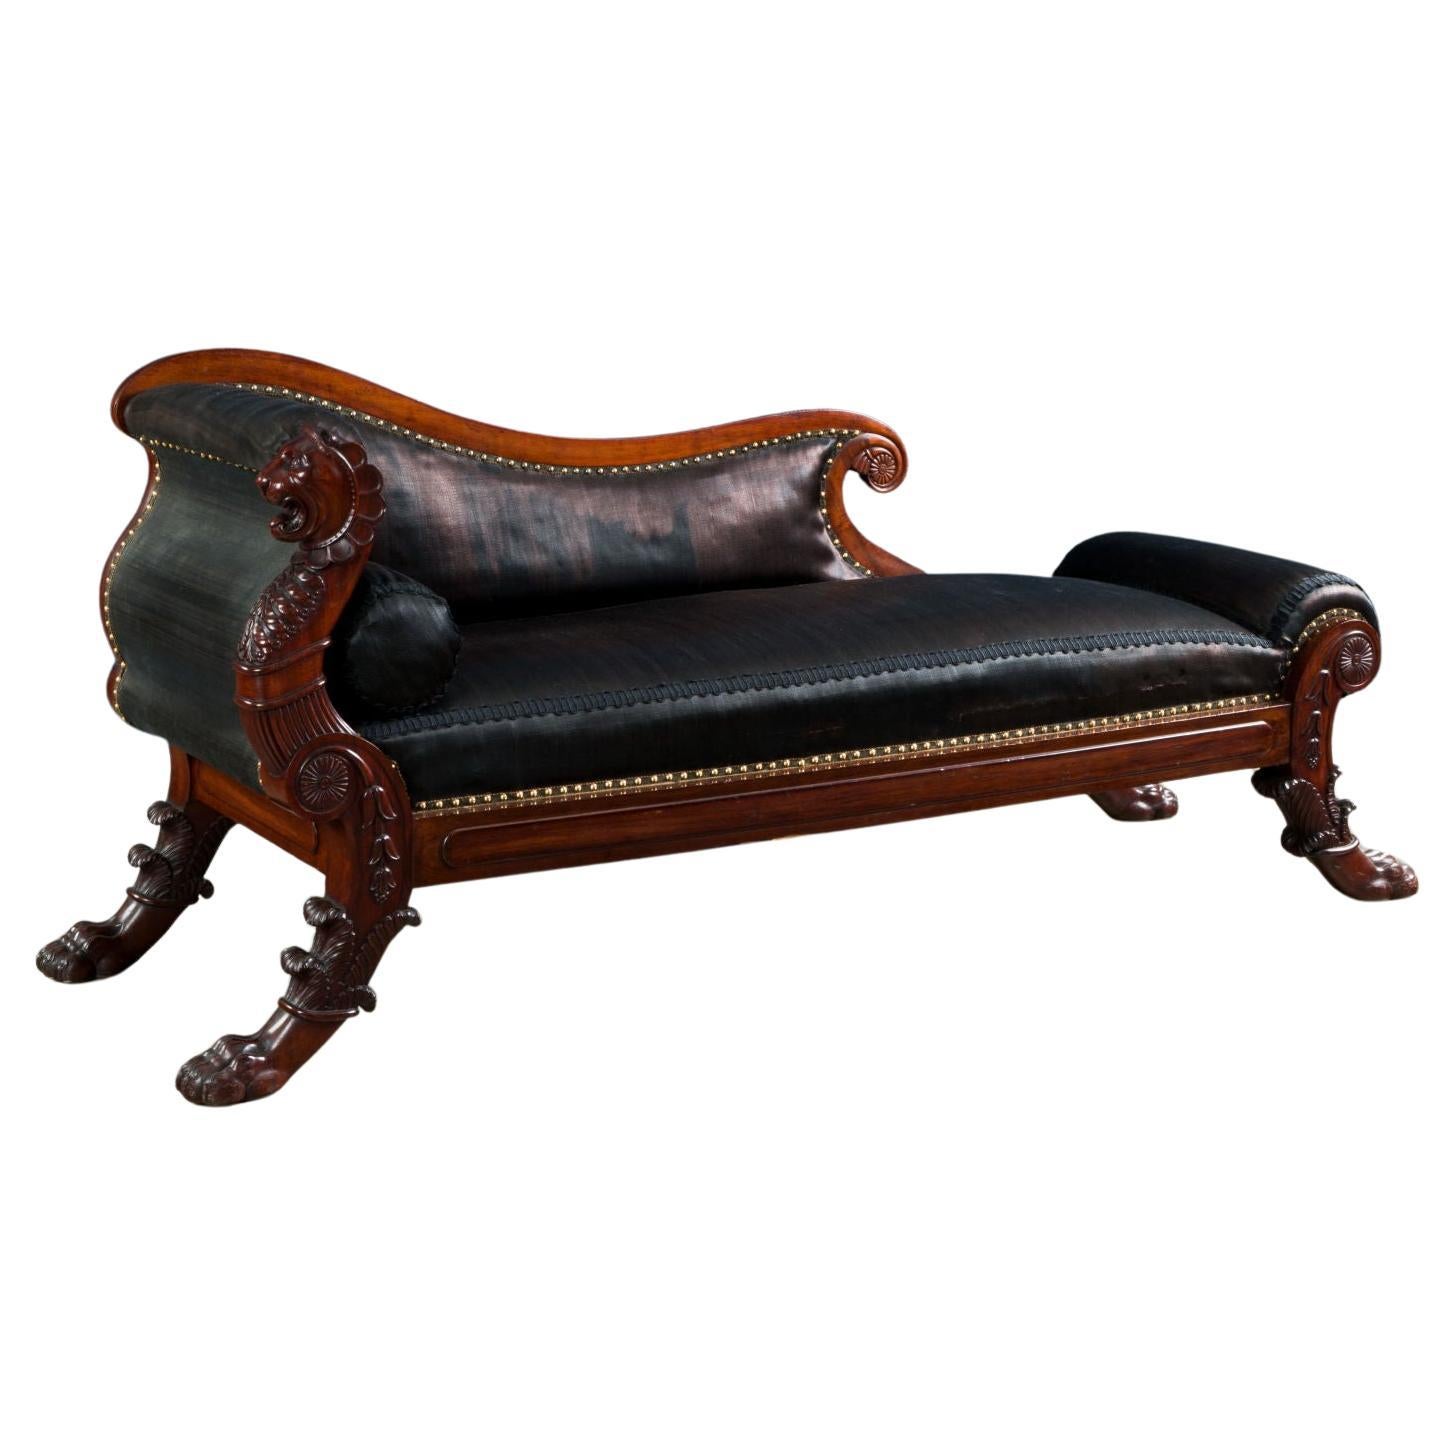 Dormeuse. Milan, c. 1860, black and brown For Sale